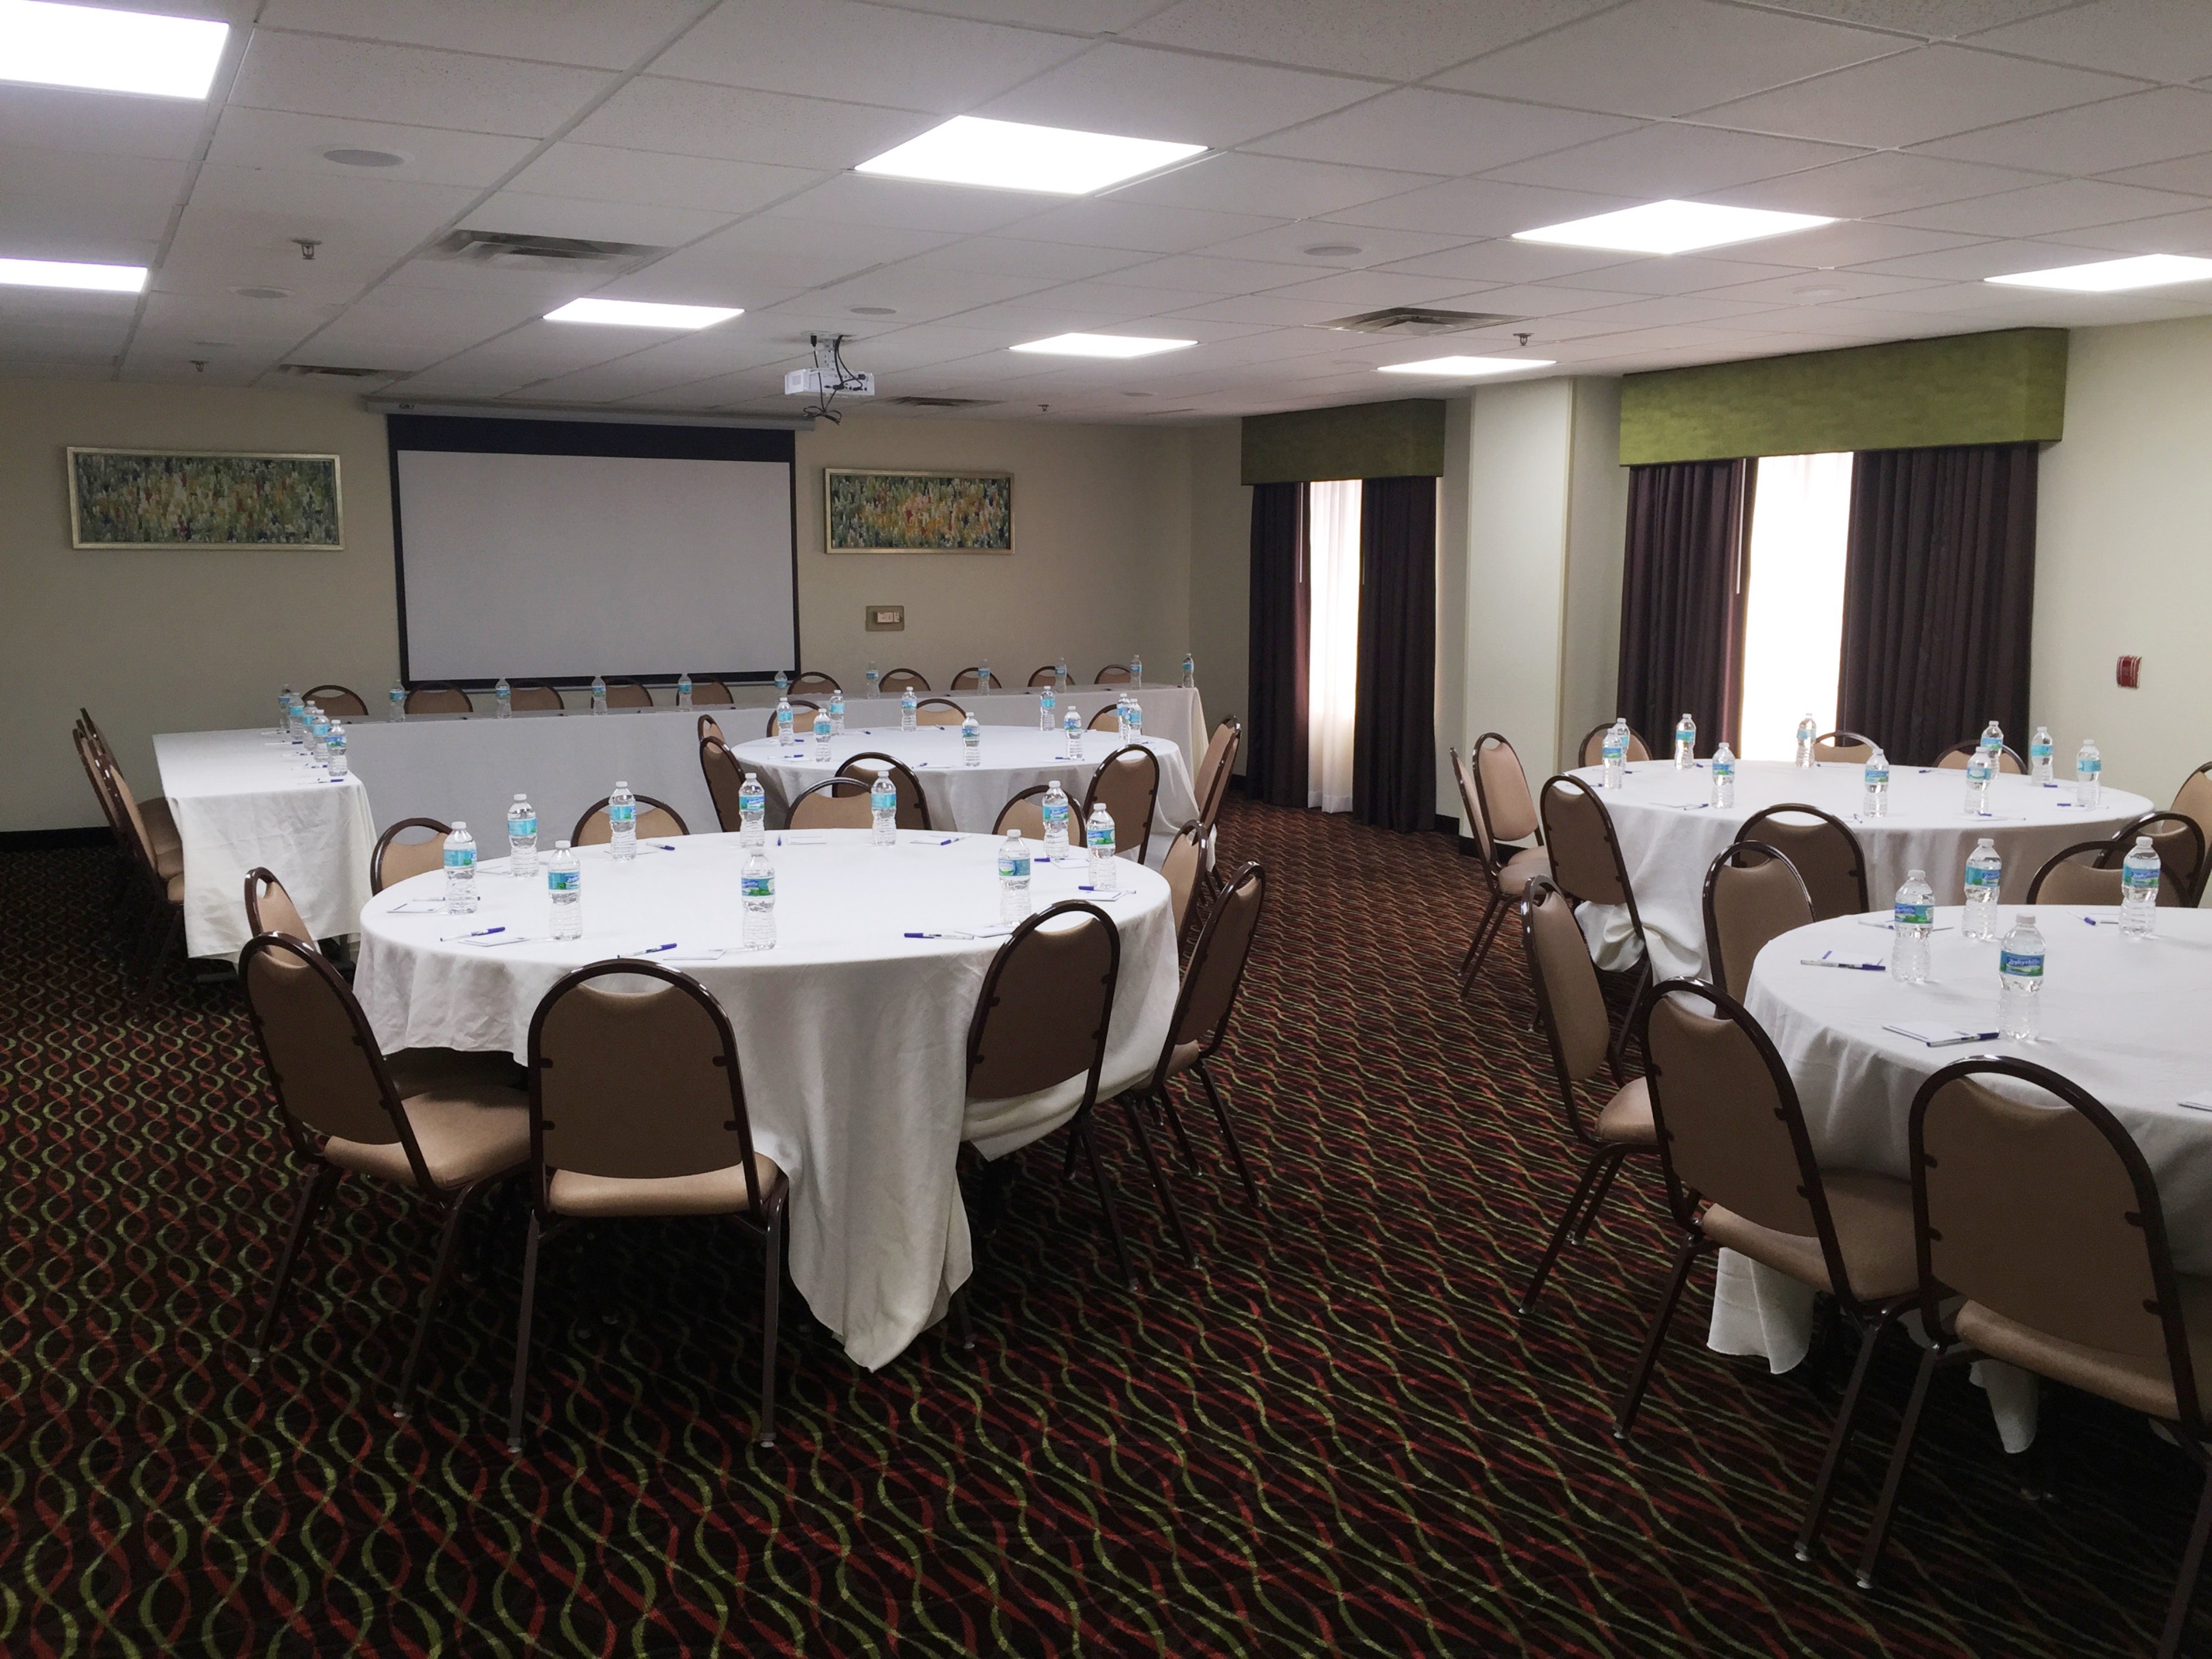 Meeting room seats up to 60 with Podium, Full A/V and HDMI